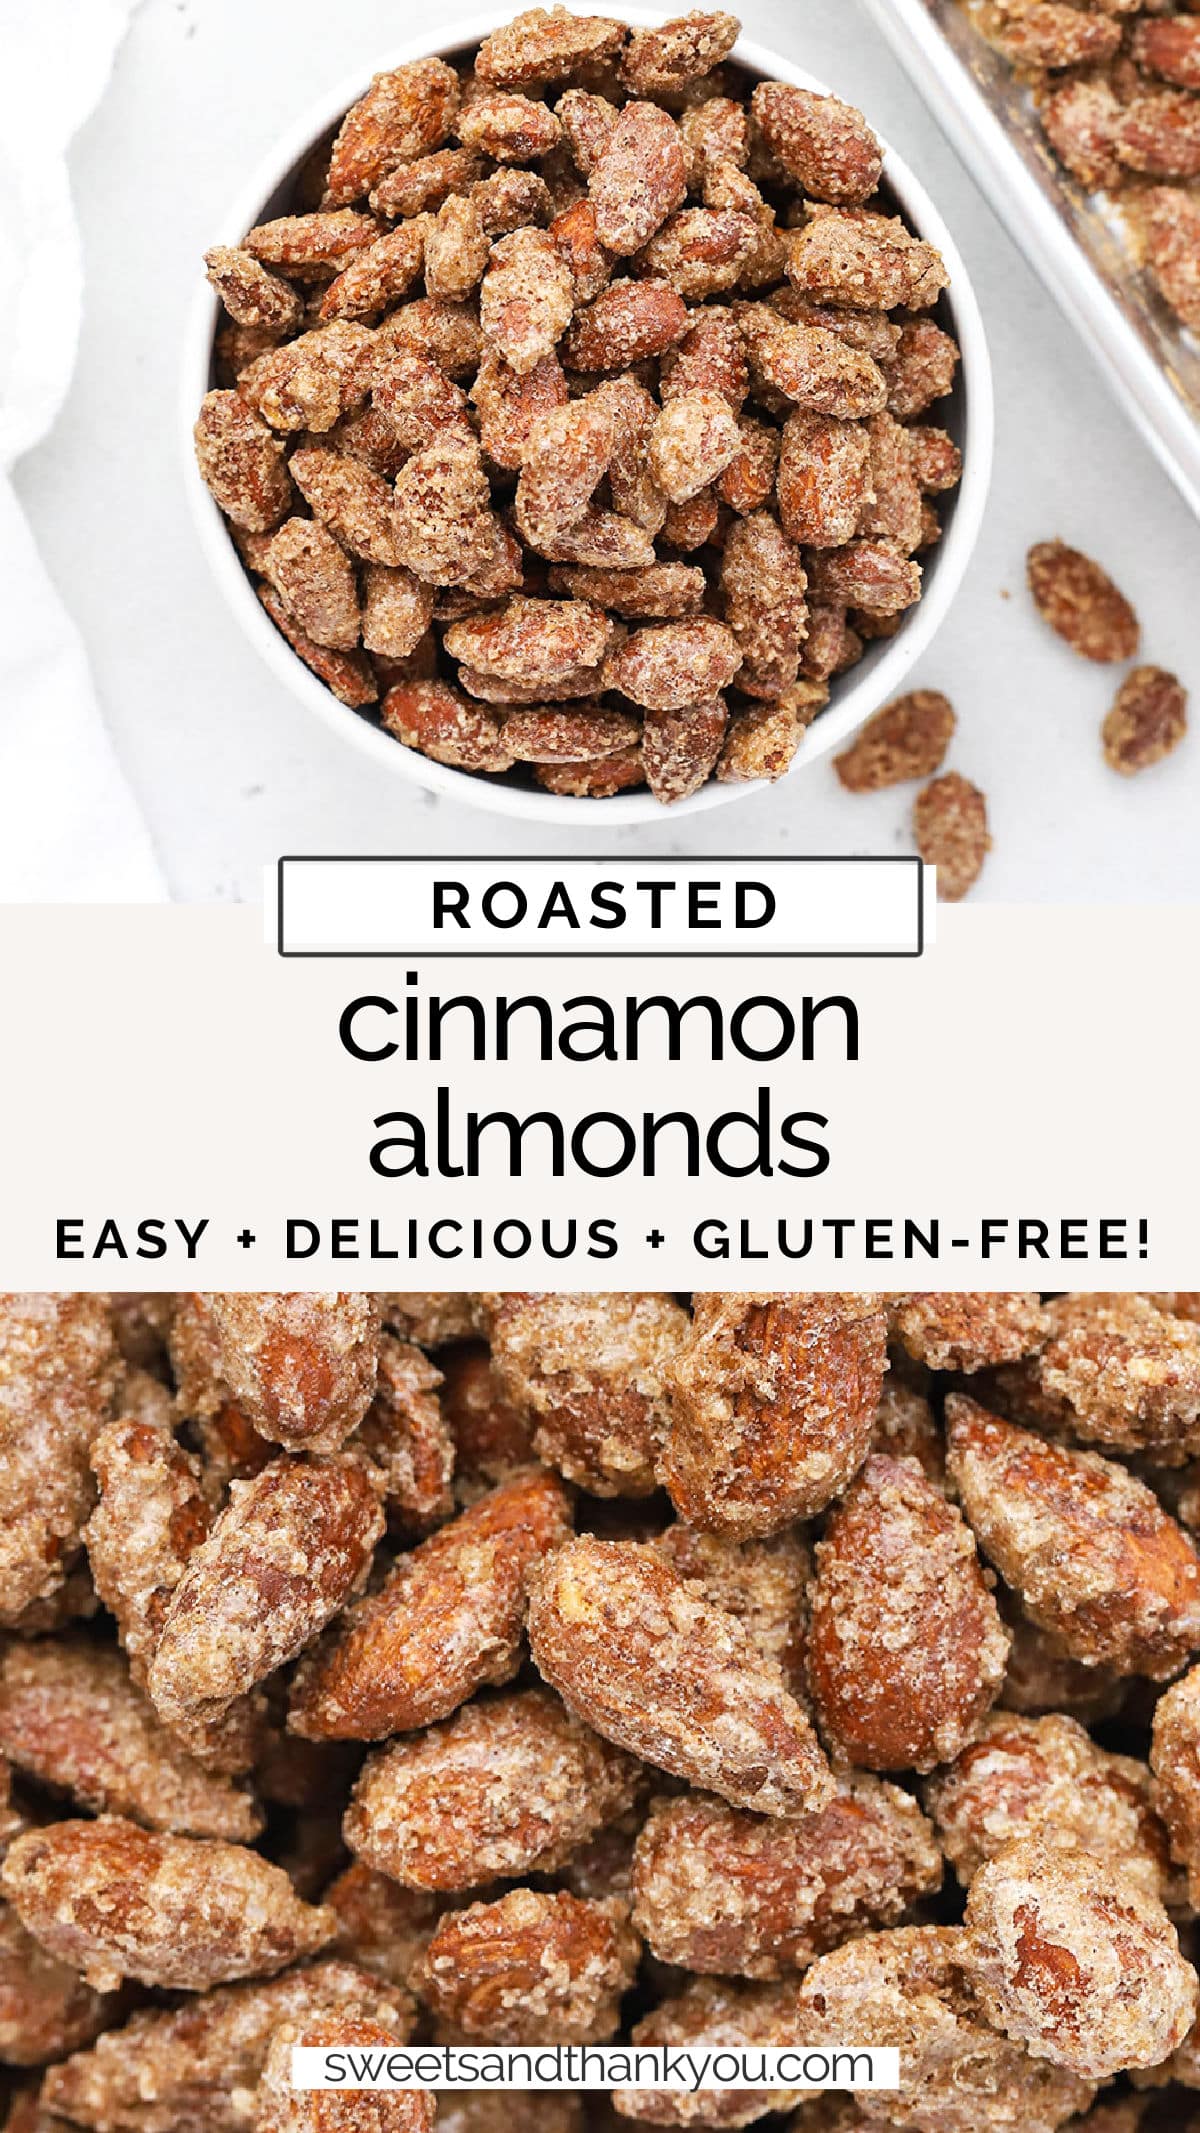 Easy Cinnamon Almonds - These roasted cinnamon almonds have all the old-fashioned flavor & crunch you love with a simply modern twist! // cinnamon sugar almonds // old fashioned cinnamon almonds // cinnamon roasted almonds recipe // the best cinnamon almonds recipe // how to package almonds for christmas // edible christmas gift // neighbor christmas gift // Crunchy cinnamon almonds // sweet cinnamon almonds //